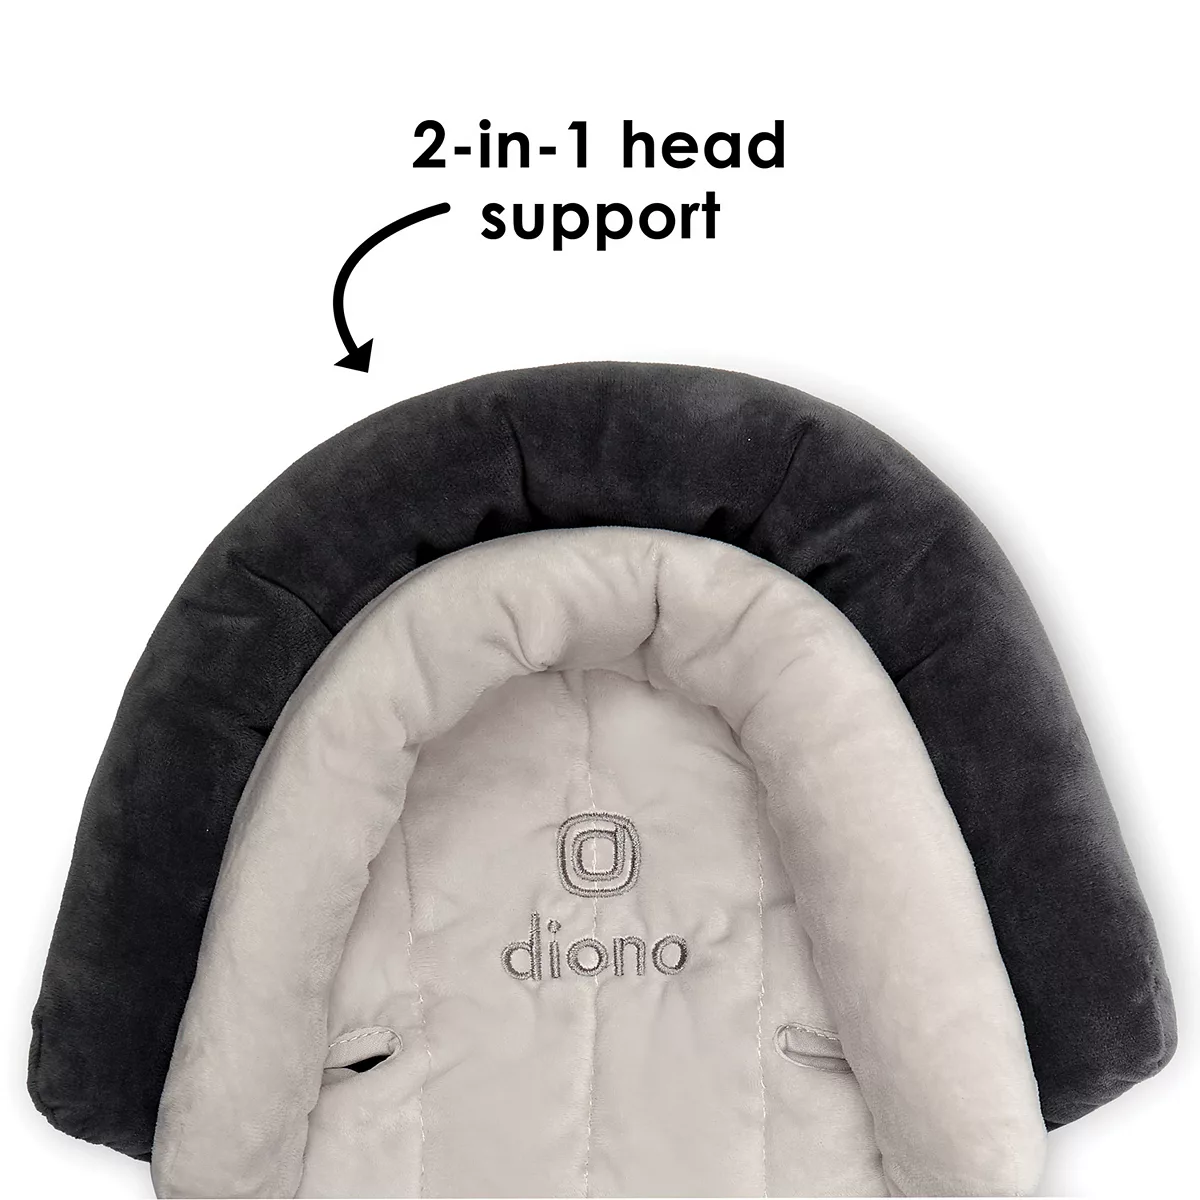 Diono Cuddle Soft 2-in-1 Baby Head Neck Body Support Pillow for Newborn Baby Super Soft Car Seat Insert Cushion